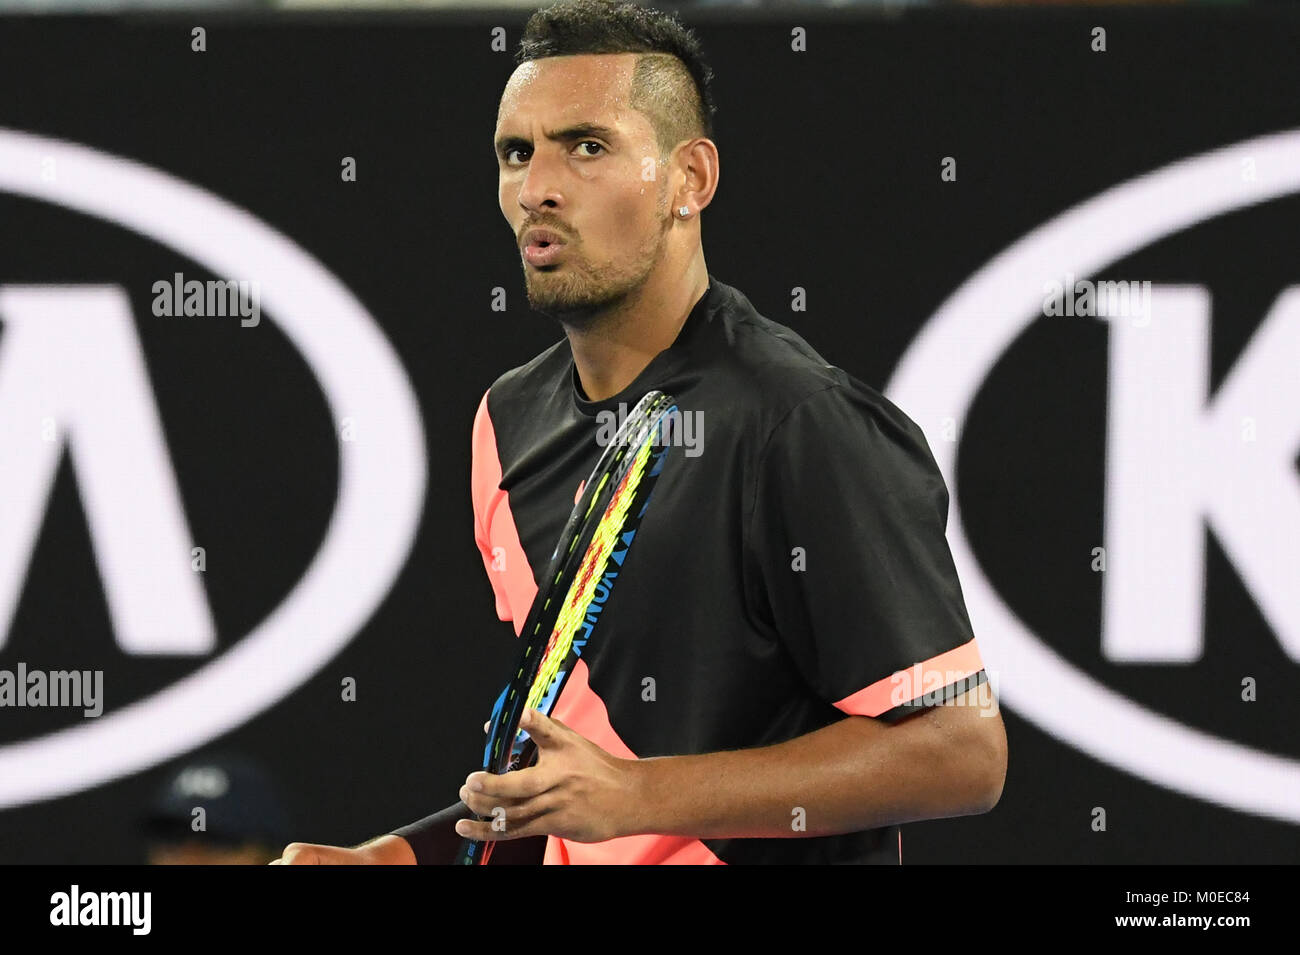 January 21, 2018: 17th seed Nick Kyrgios of Australia in action against 3rd seed Grigor Dimitrov of Bulgaria in a 4th round match on day seven of the 2018 Australian Open Grand Slam tennis tournament in Melbourne, Australia. Sydney Low/Cal Sport Media Credit: Cal Sport Media/Alamy Live News Stock Photo